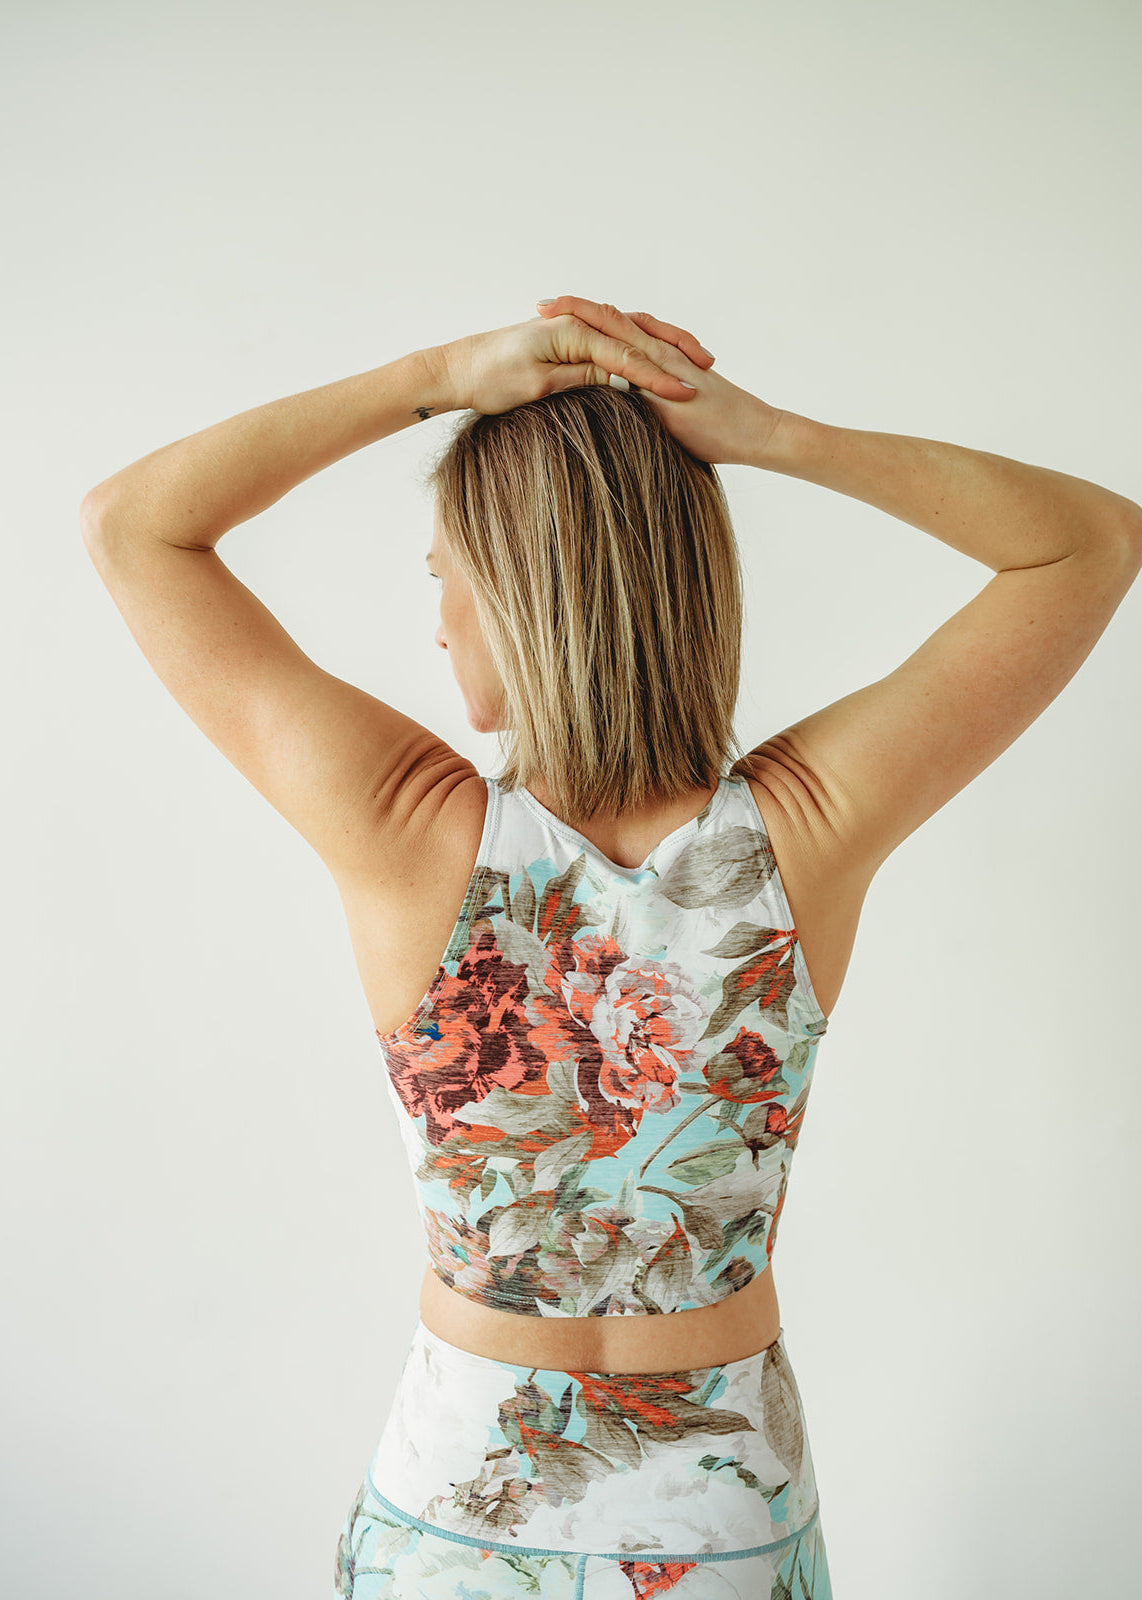 Teal Floral Crop Top *FINAL SALE* Colorado Threads Clothing